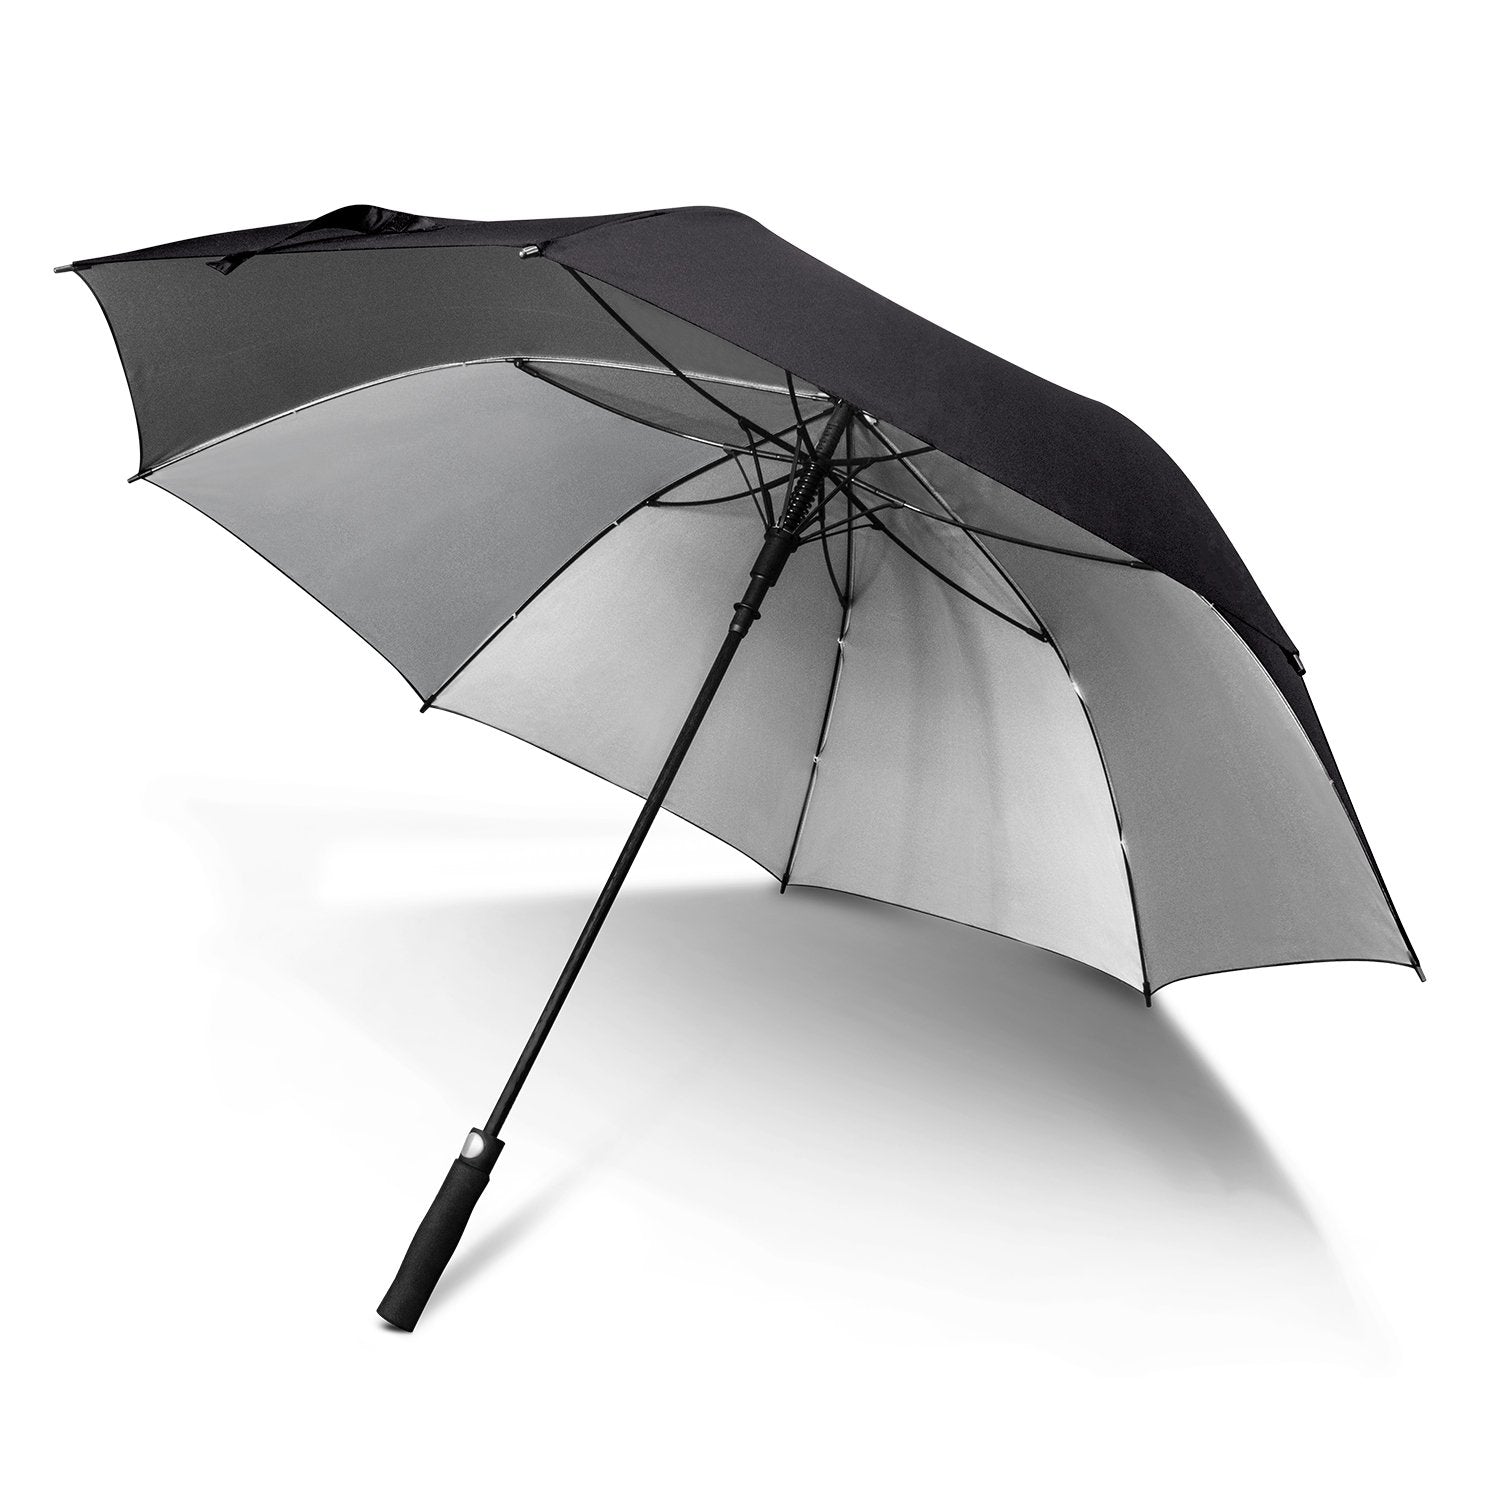 STORM PROOF ULTIMATE®️ Heavy Duty Umbrella With Silver Underside, Windproof Fibreglass Frame and Fibreglass Shaft - Premium Automatic Opening